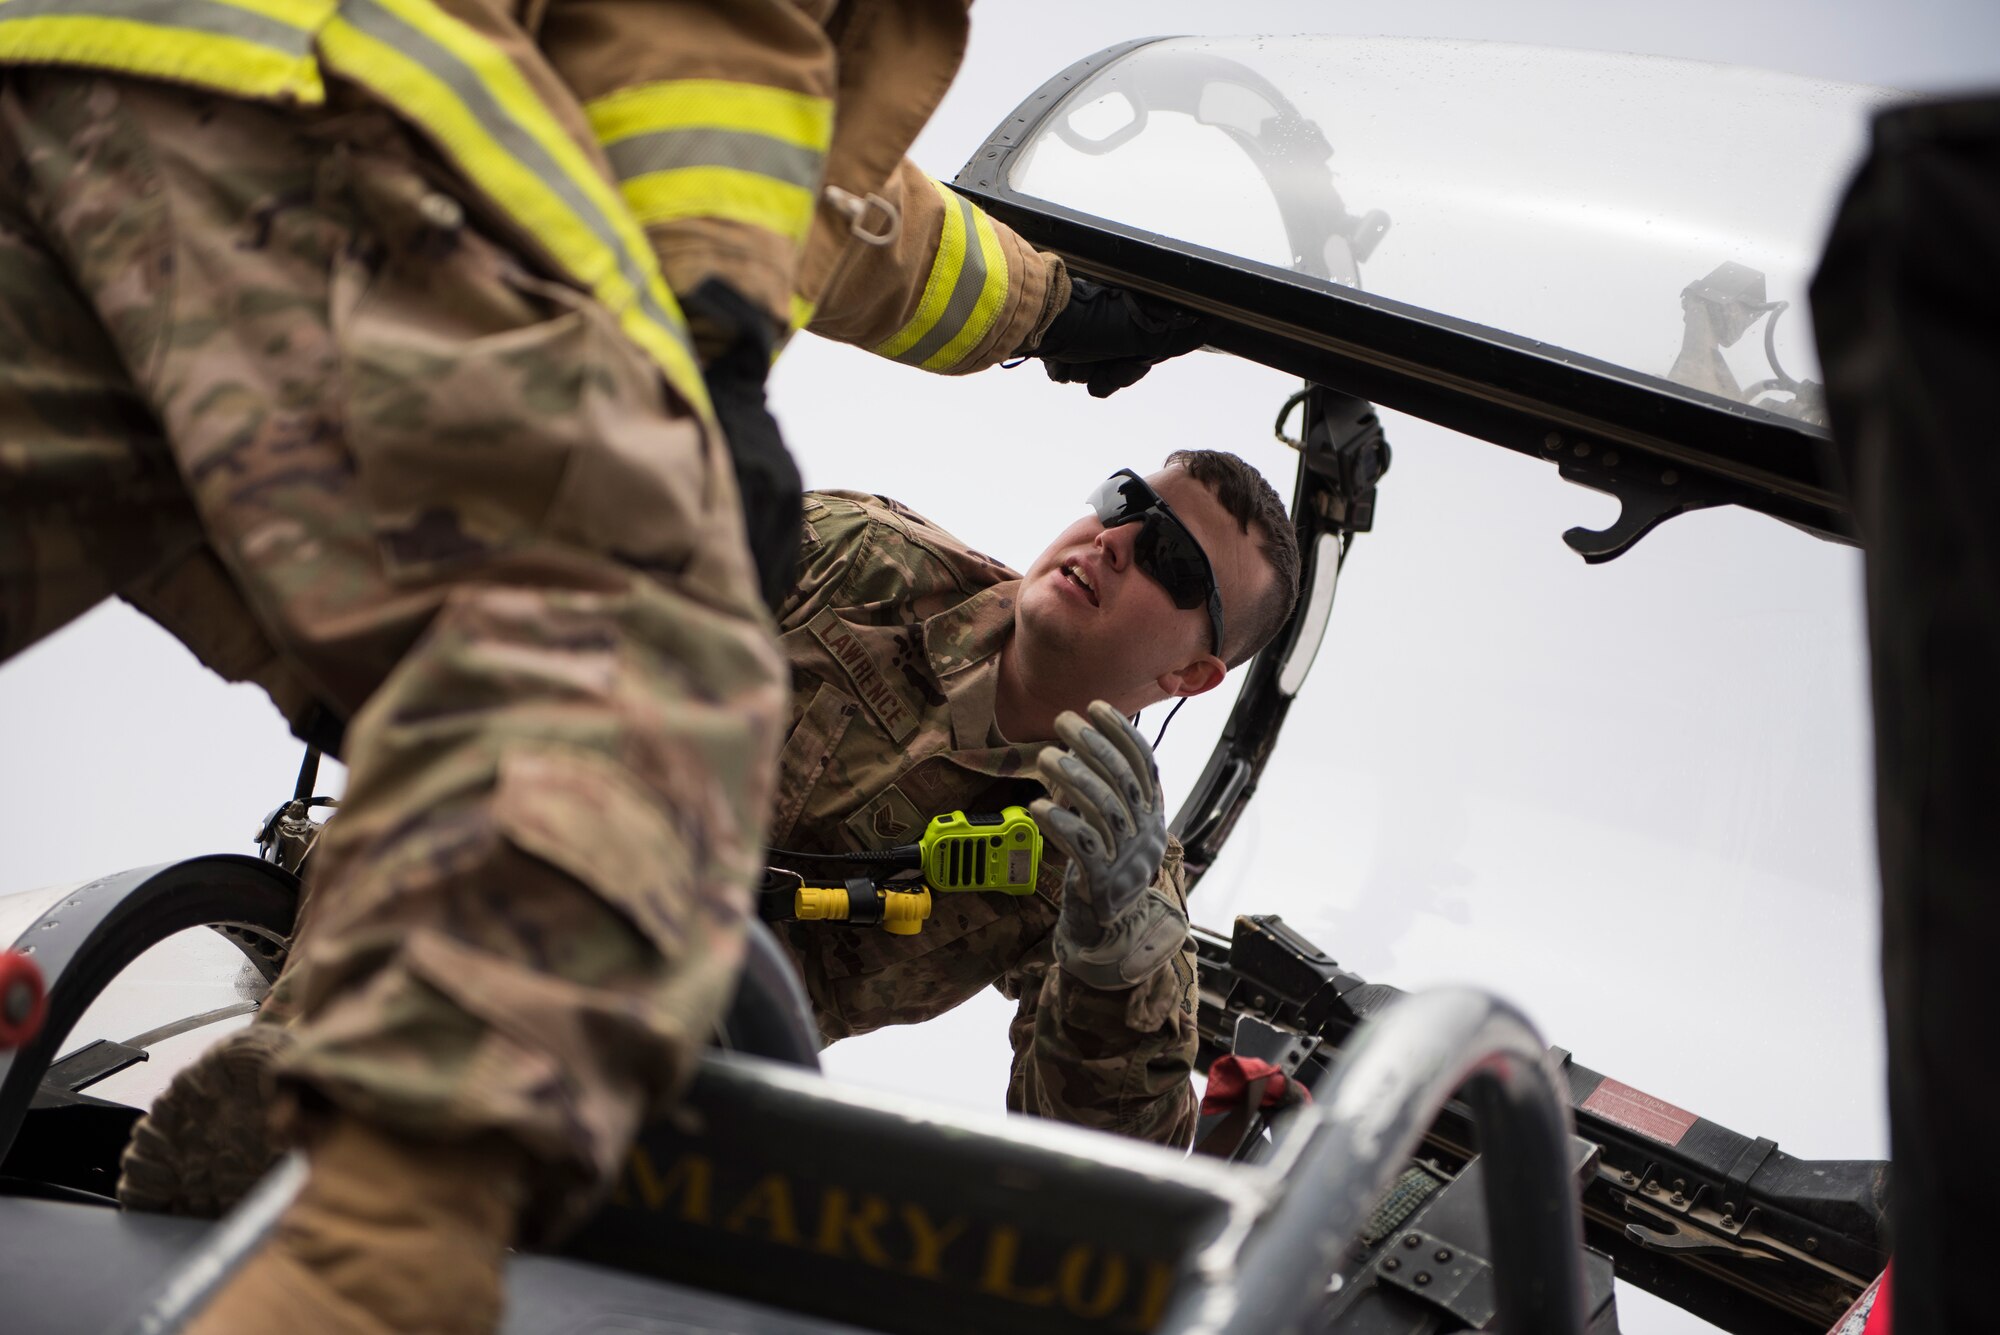 Staff Sgt. Derrick Lawrence, a firefighter assigned to the 332d Expeditionary Civil Engineer Squadron, discusses response strategies with a teammate during F-15E Strike Eagle emergency egress training February 14, 2018 in Southwest Asia. The exercise tested the team’s ability to respond to an aircraft mishap quickly and with a cohesive plan in place.  (U.S. Air Force photo by Staff Sgt. Joshua Kleinholz)